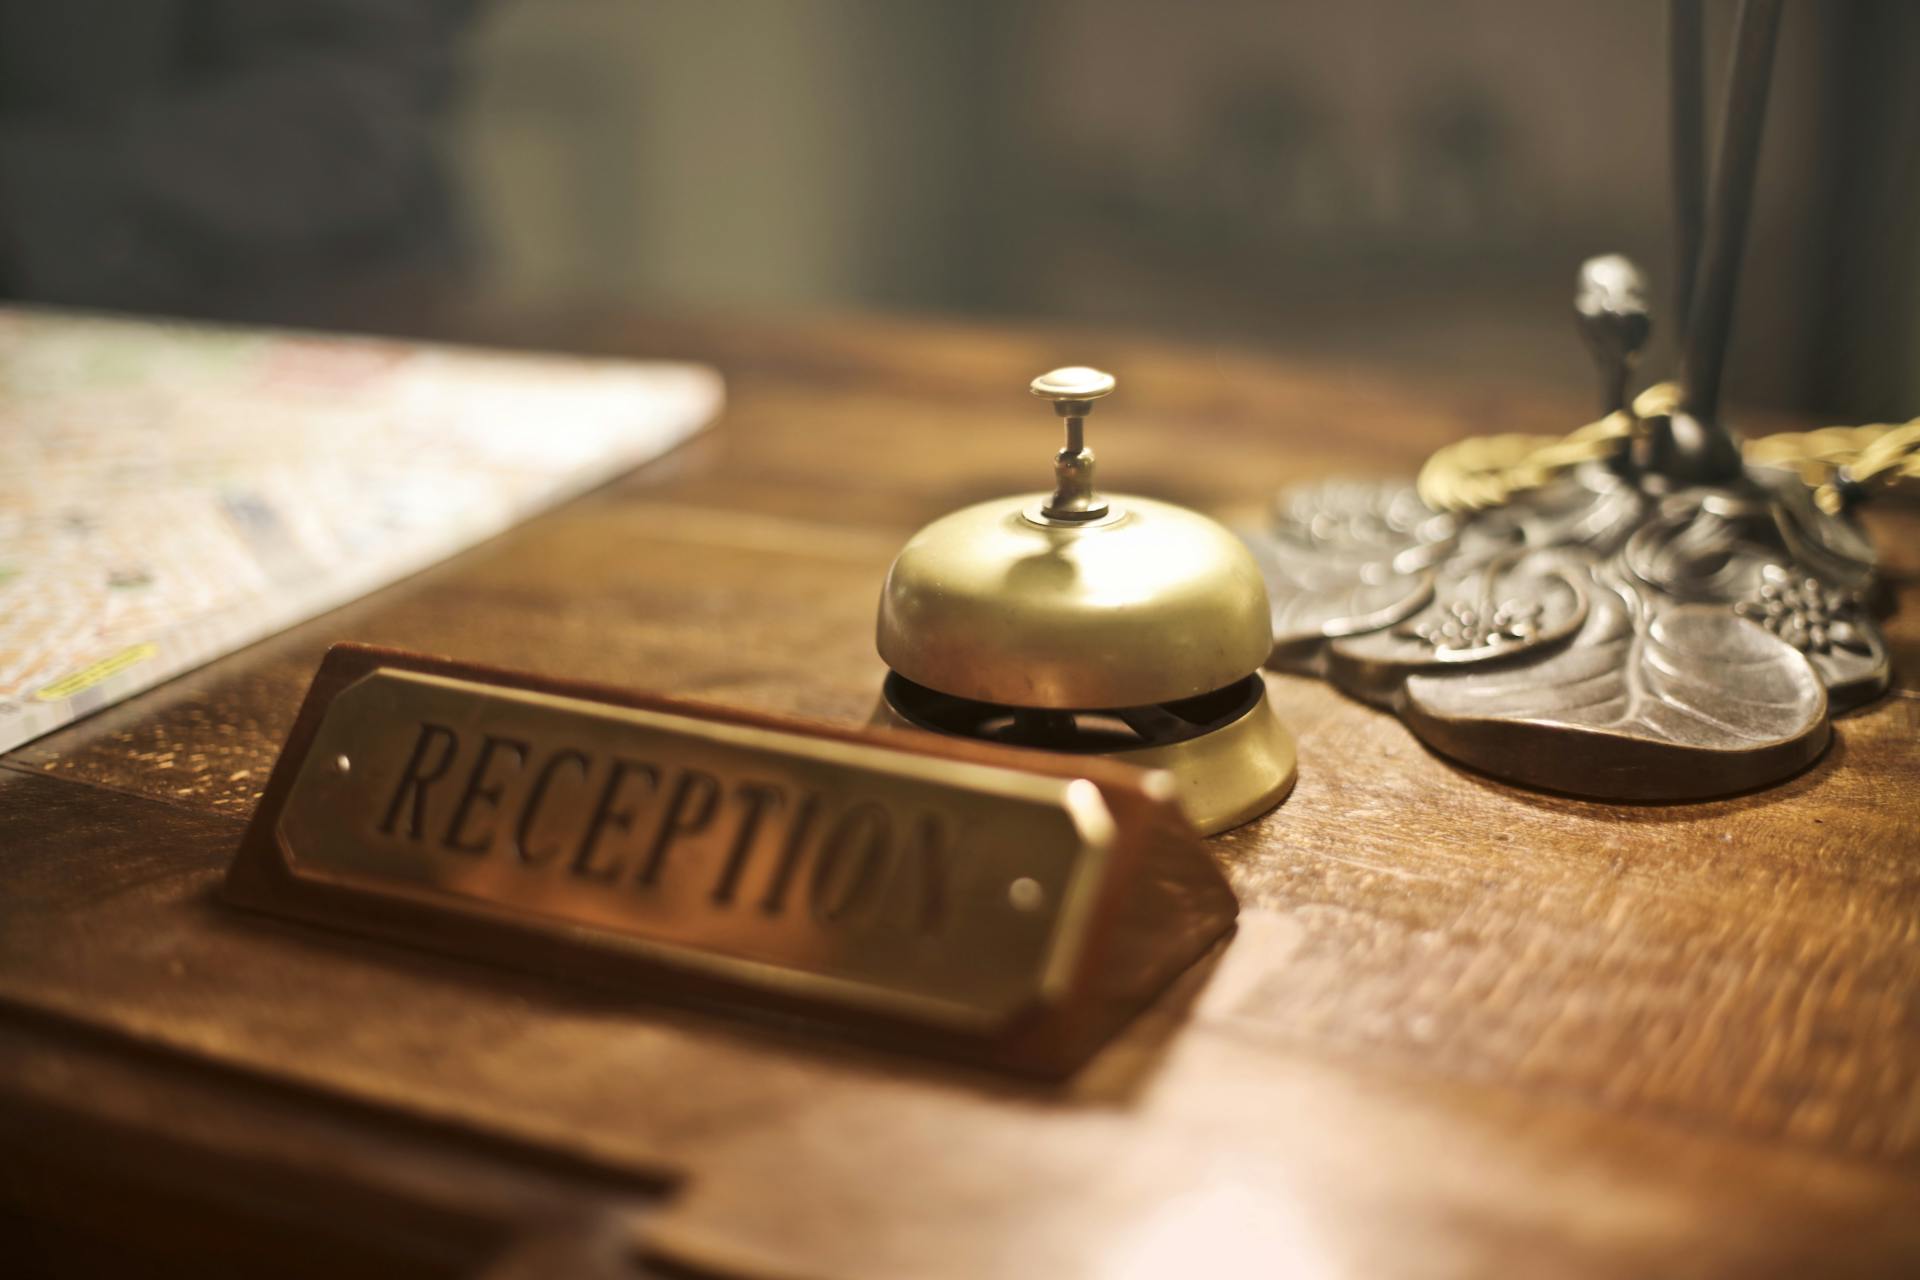 A reception desk with an antique hotel bell | Source: Pexels